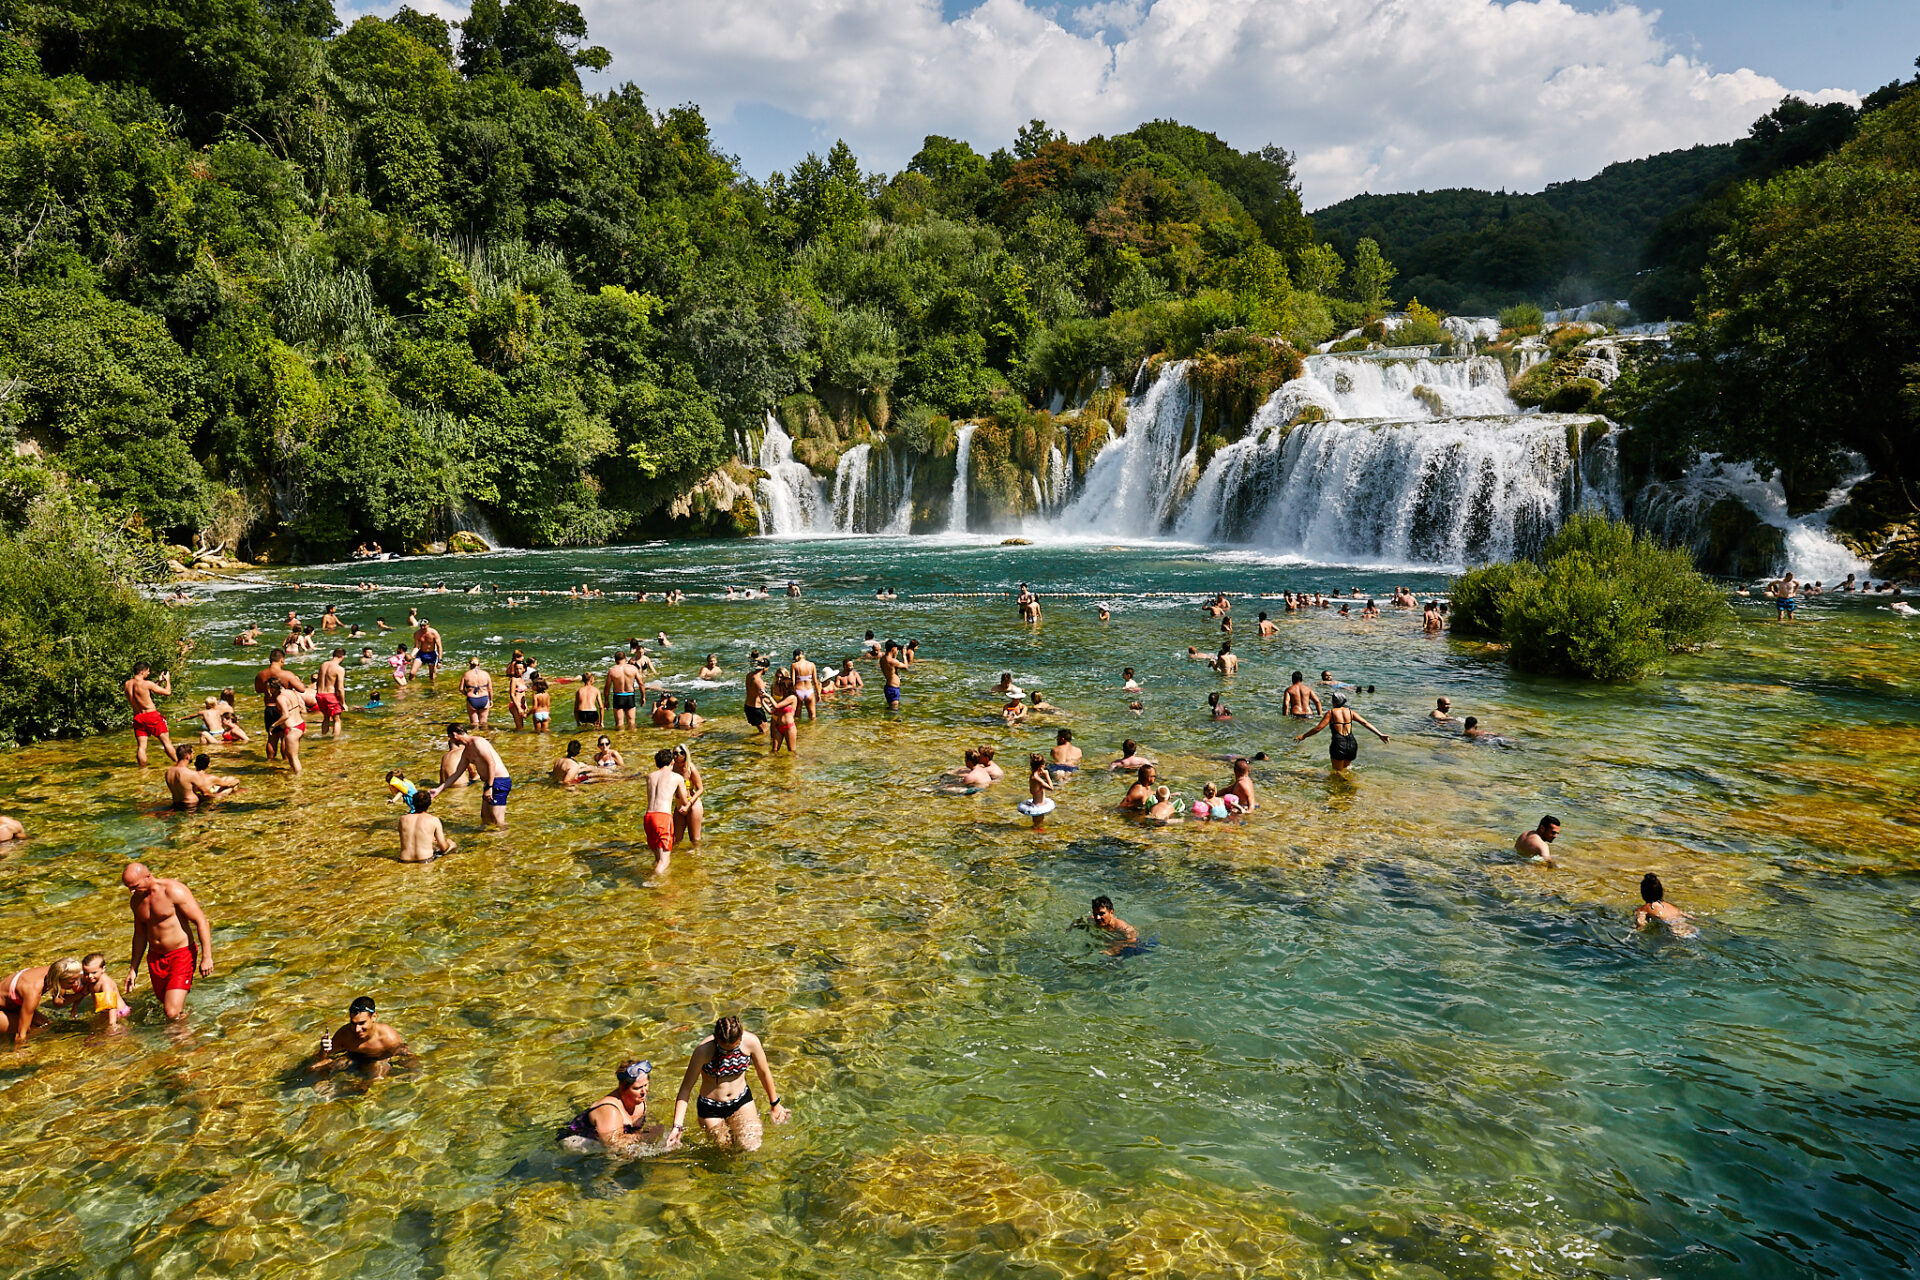 Coming soon – Ante’s Famous Minibus Tour – to Krka National Park